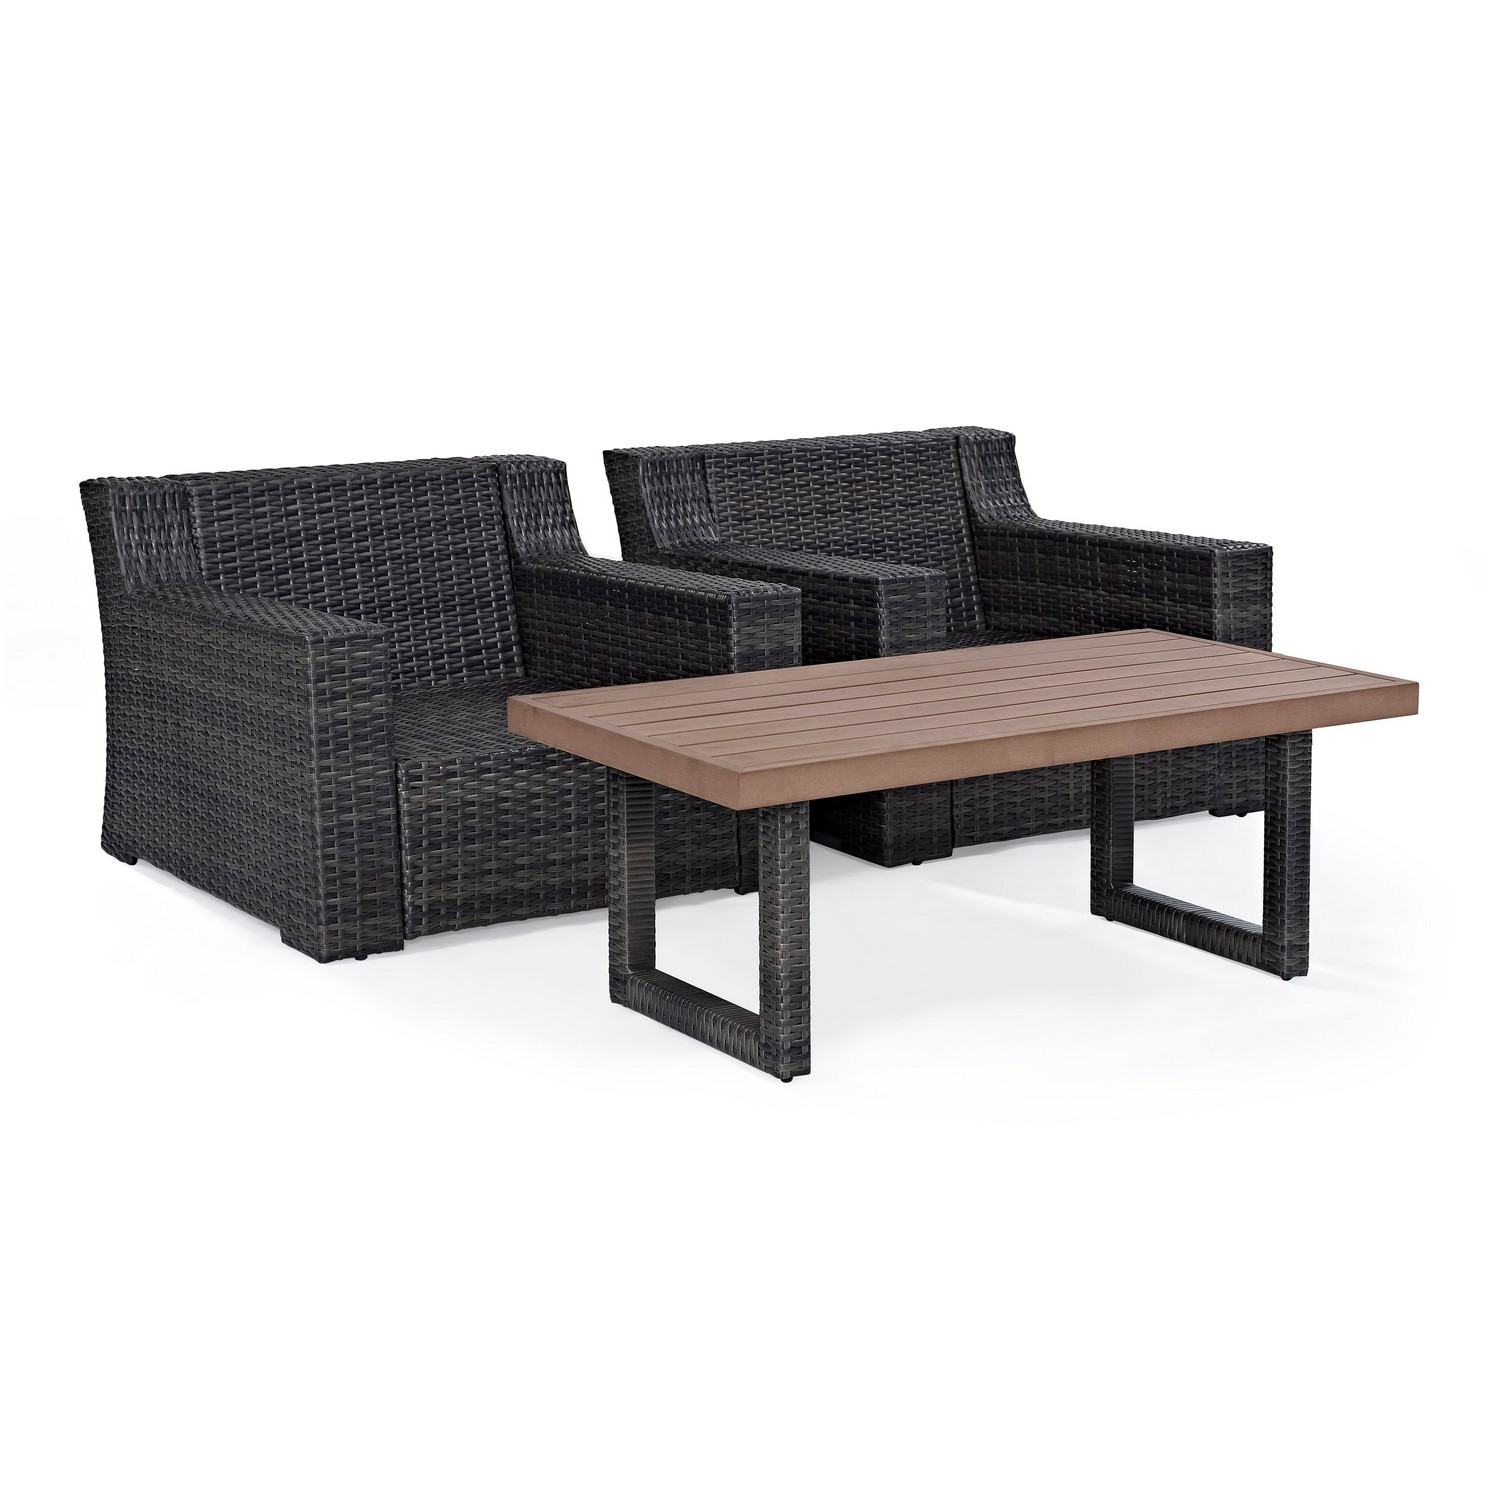 Crosley Beaufort 3-PC Outdoor Wicker Chair Set - Coffee Table and 2 Chairs - Mist/Brown